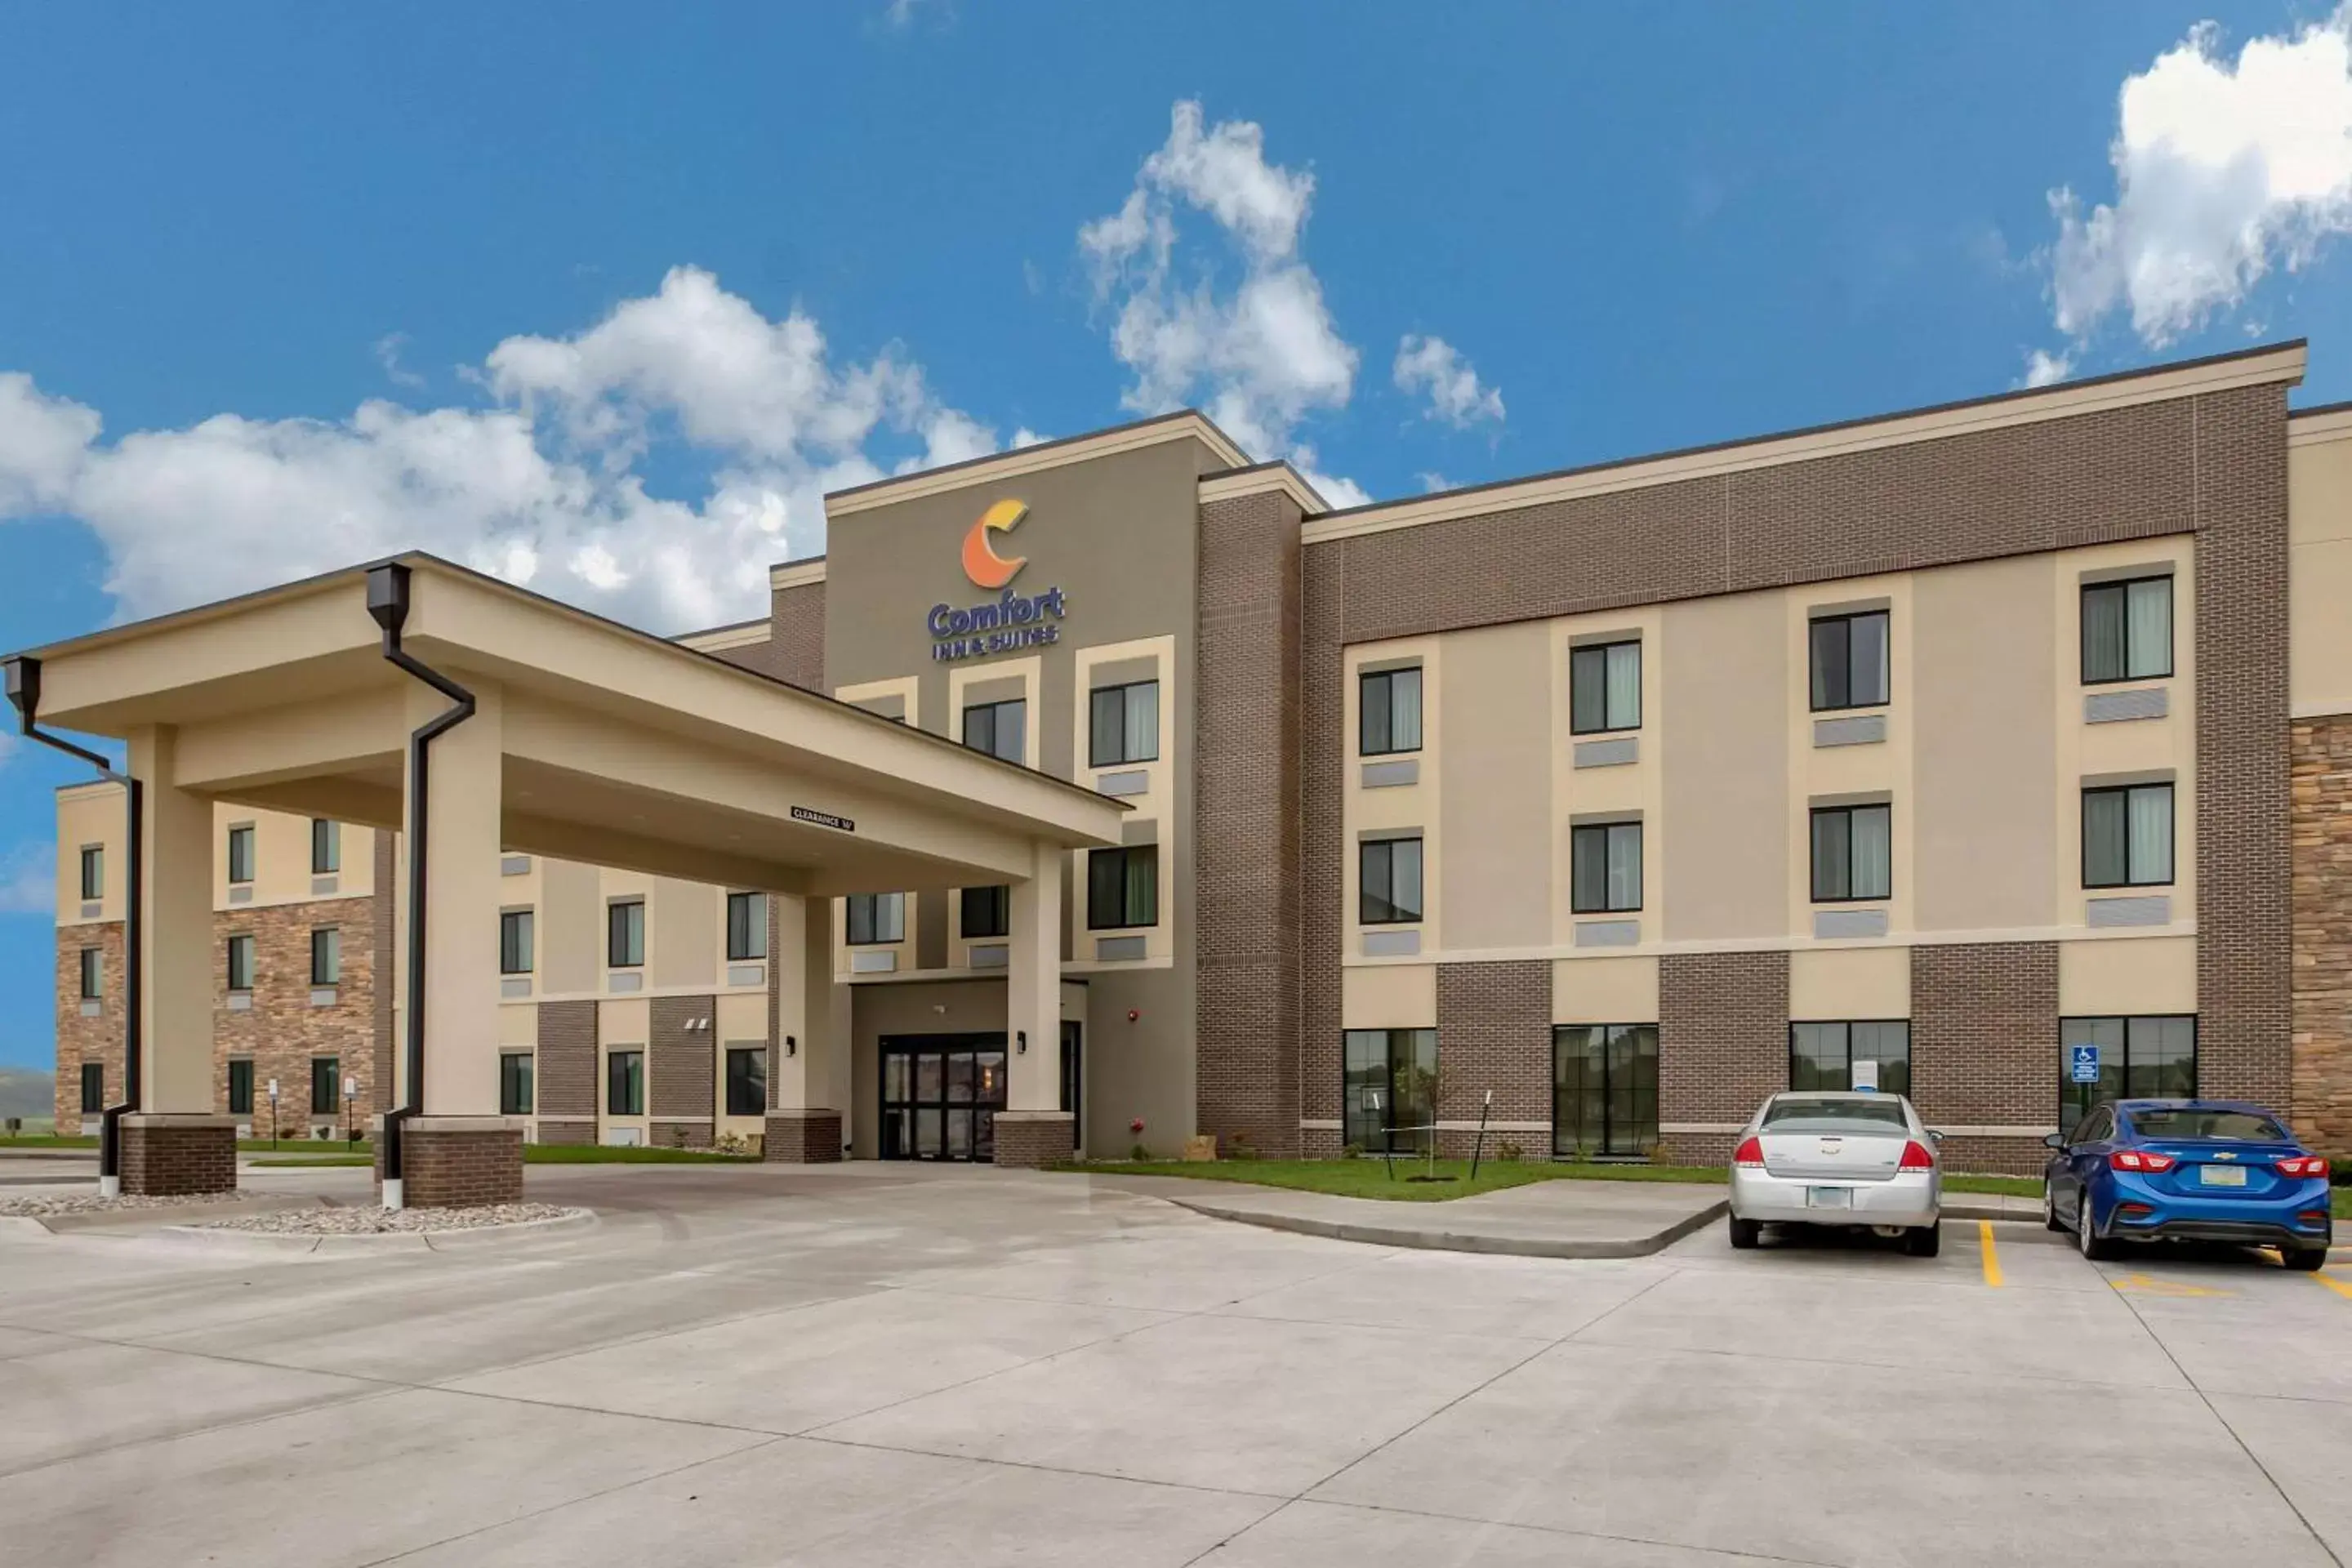 Property Building in Comfort Inn and Suites Ames near ISU Campus